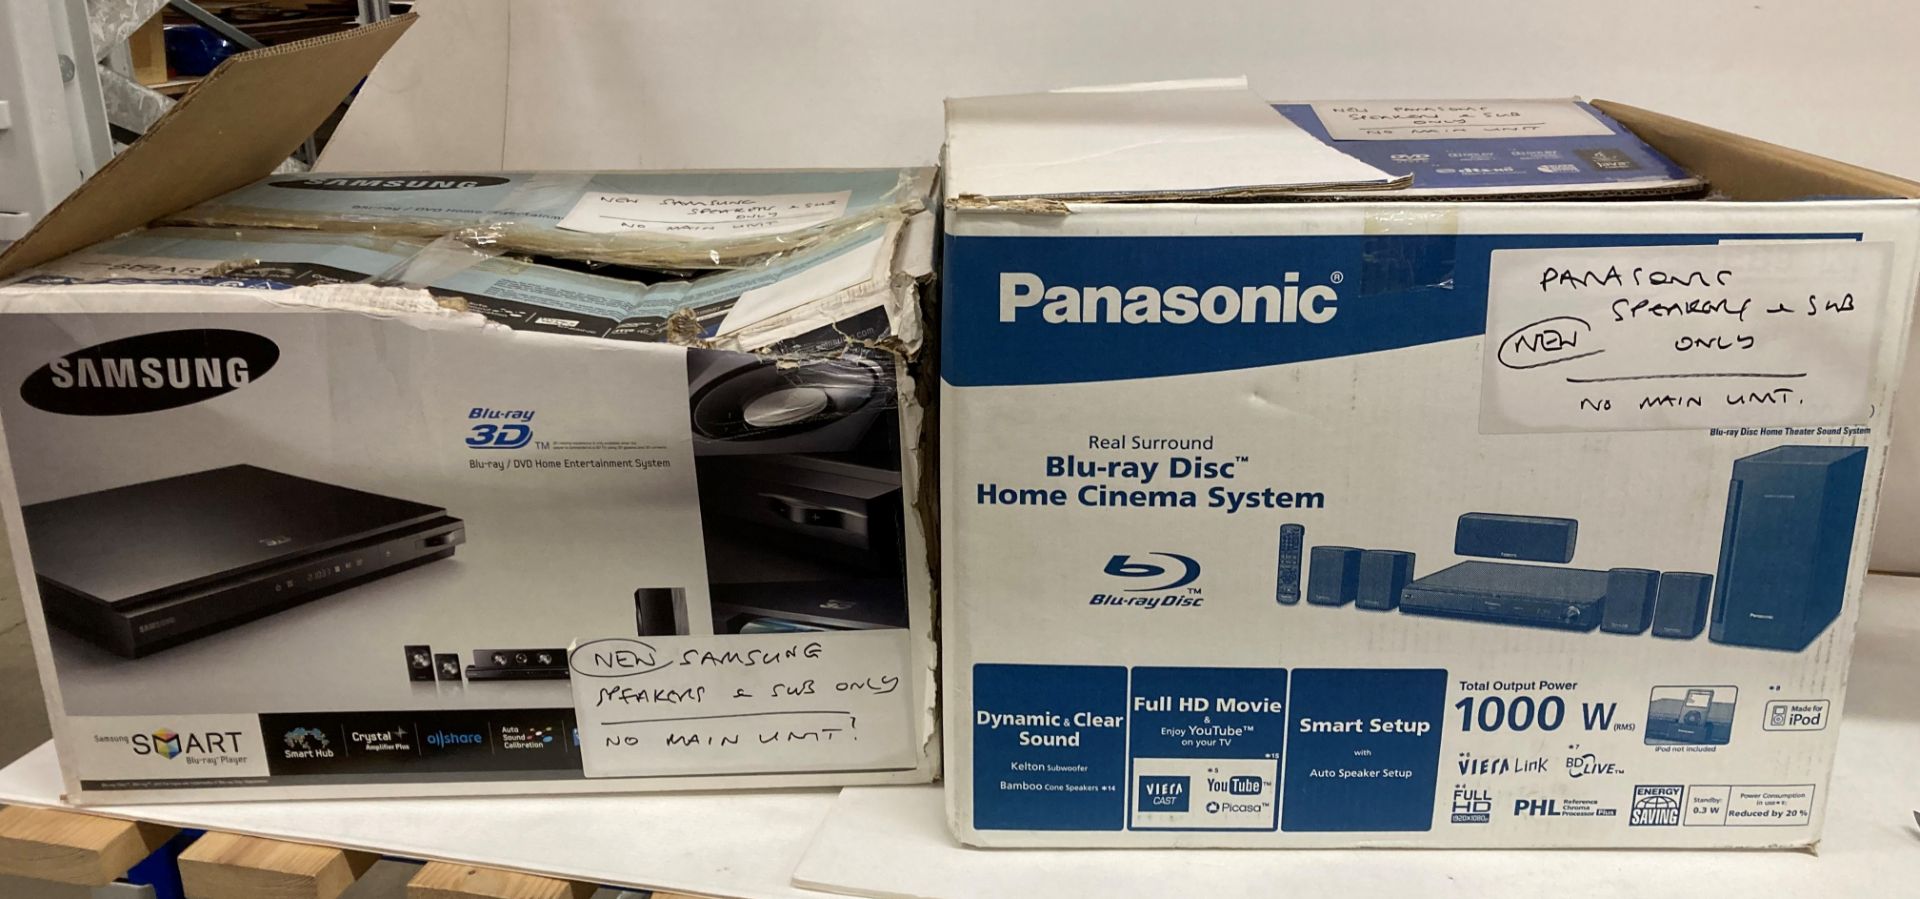 Samsung and Panasonic subwoofers and speakers (no Blu-ray disc systems - boxed) (saleroom location: